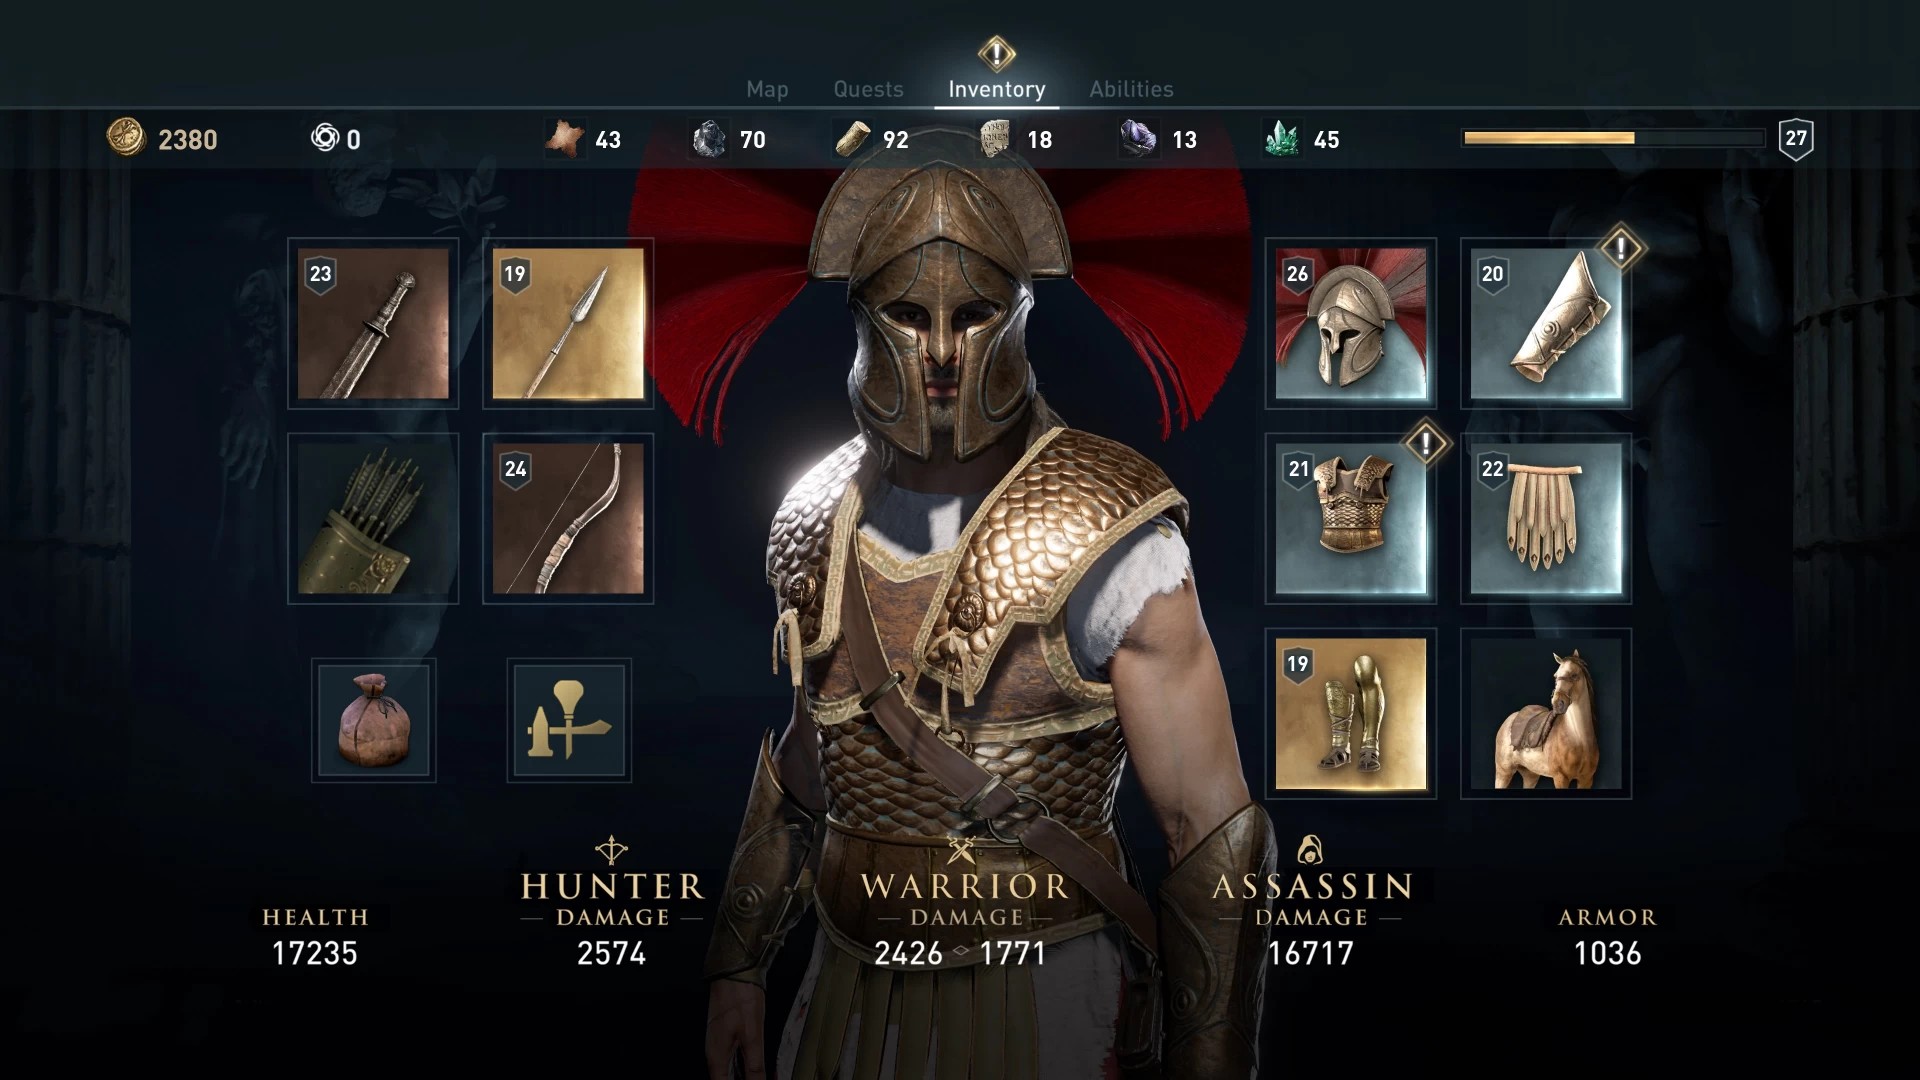 Free Cool Assassin S Creed Odyssey Chrome Extension Hd Wallpaper Theme Tab For Chrome Browser - fortnite roblox assassins creed and others games